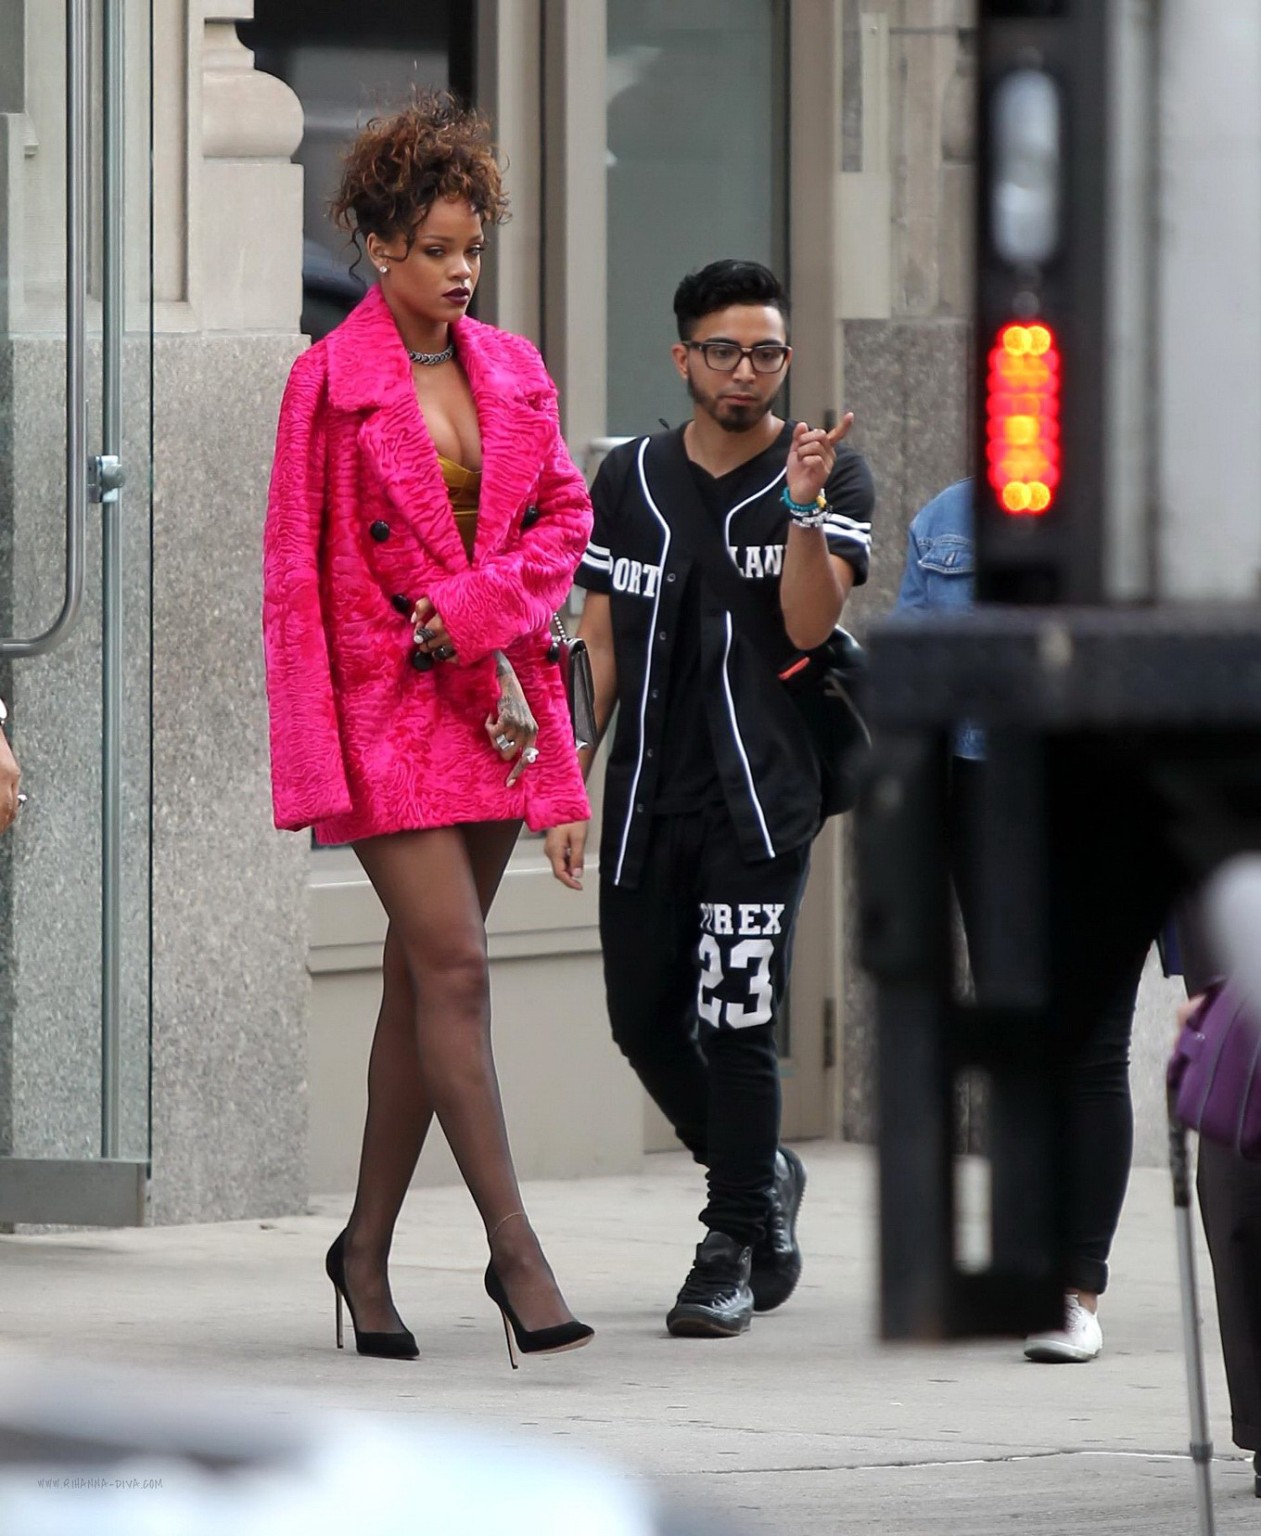 Rihanna shows cleavage and legs wearing a little yellow dress outside Nobu resta #75183266